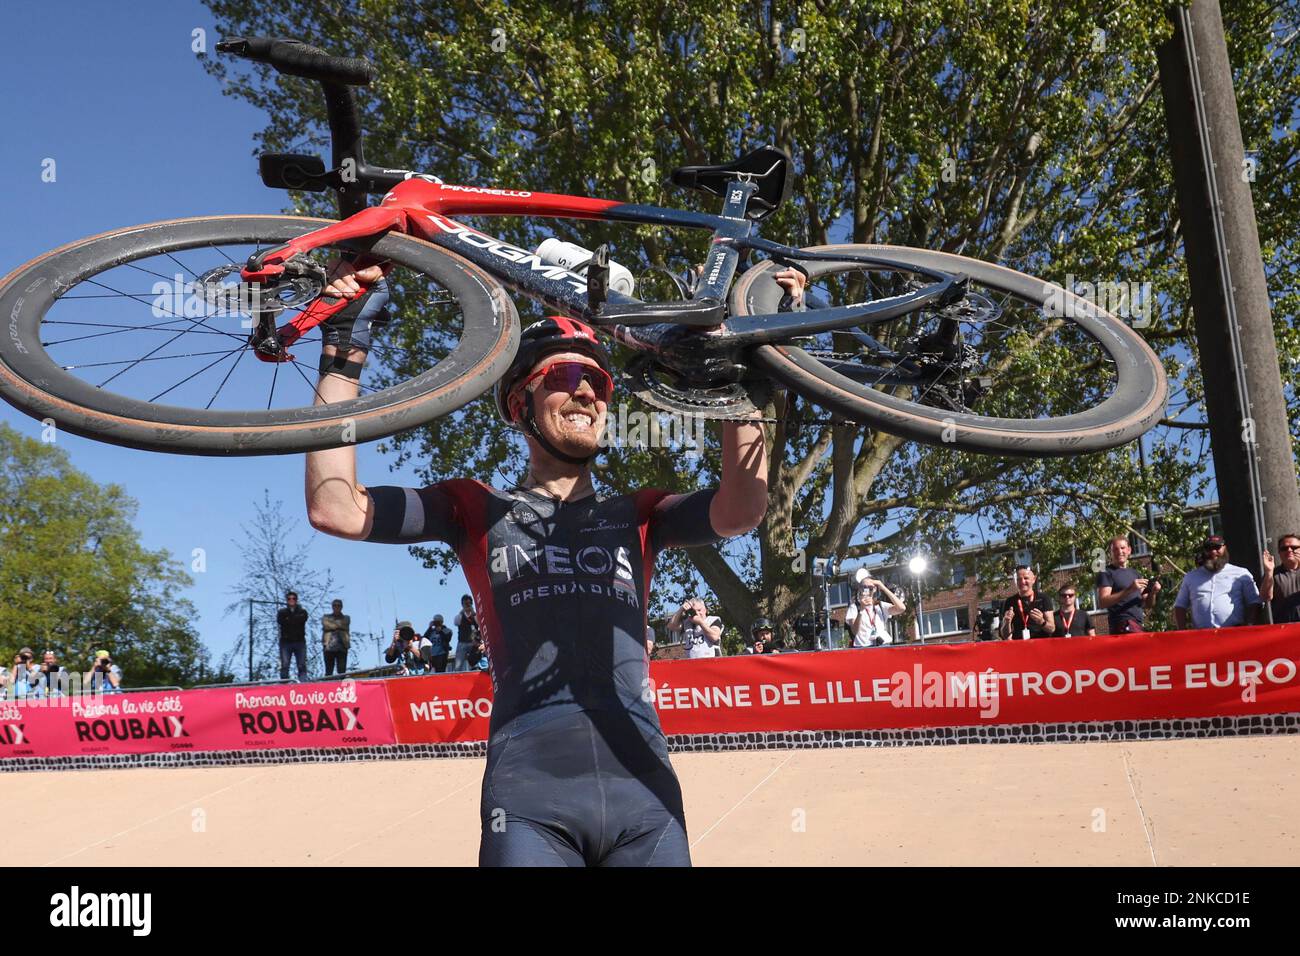 Netherlands Dylan Van Baarle celebrates after winning the Paris-Roubaix cycling race, a 257 kilometer (160 mile) one-day-race at the velodrome in Roubaix, northern France, Sunday, April 17, 2022